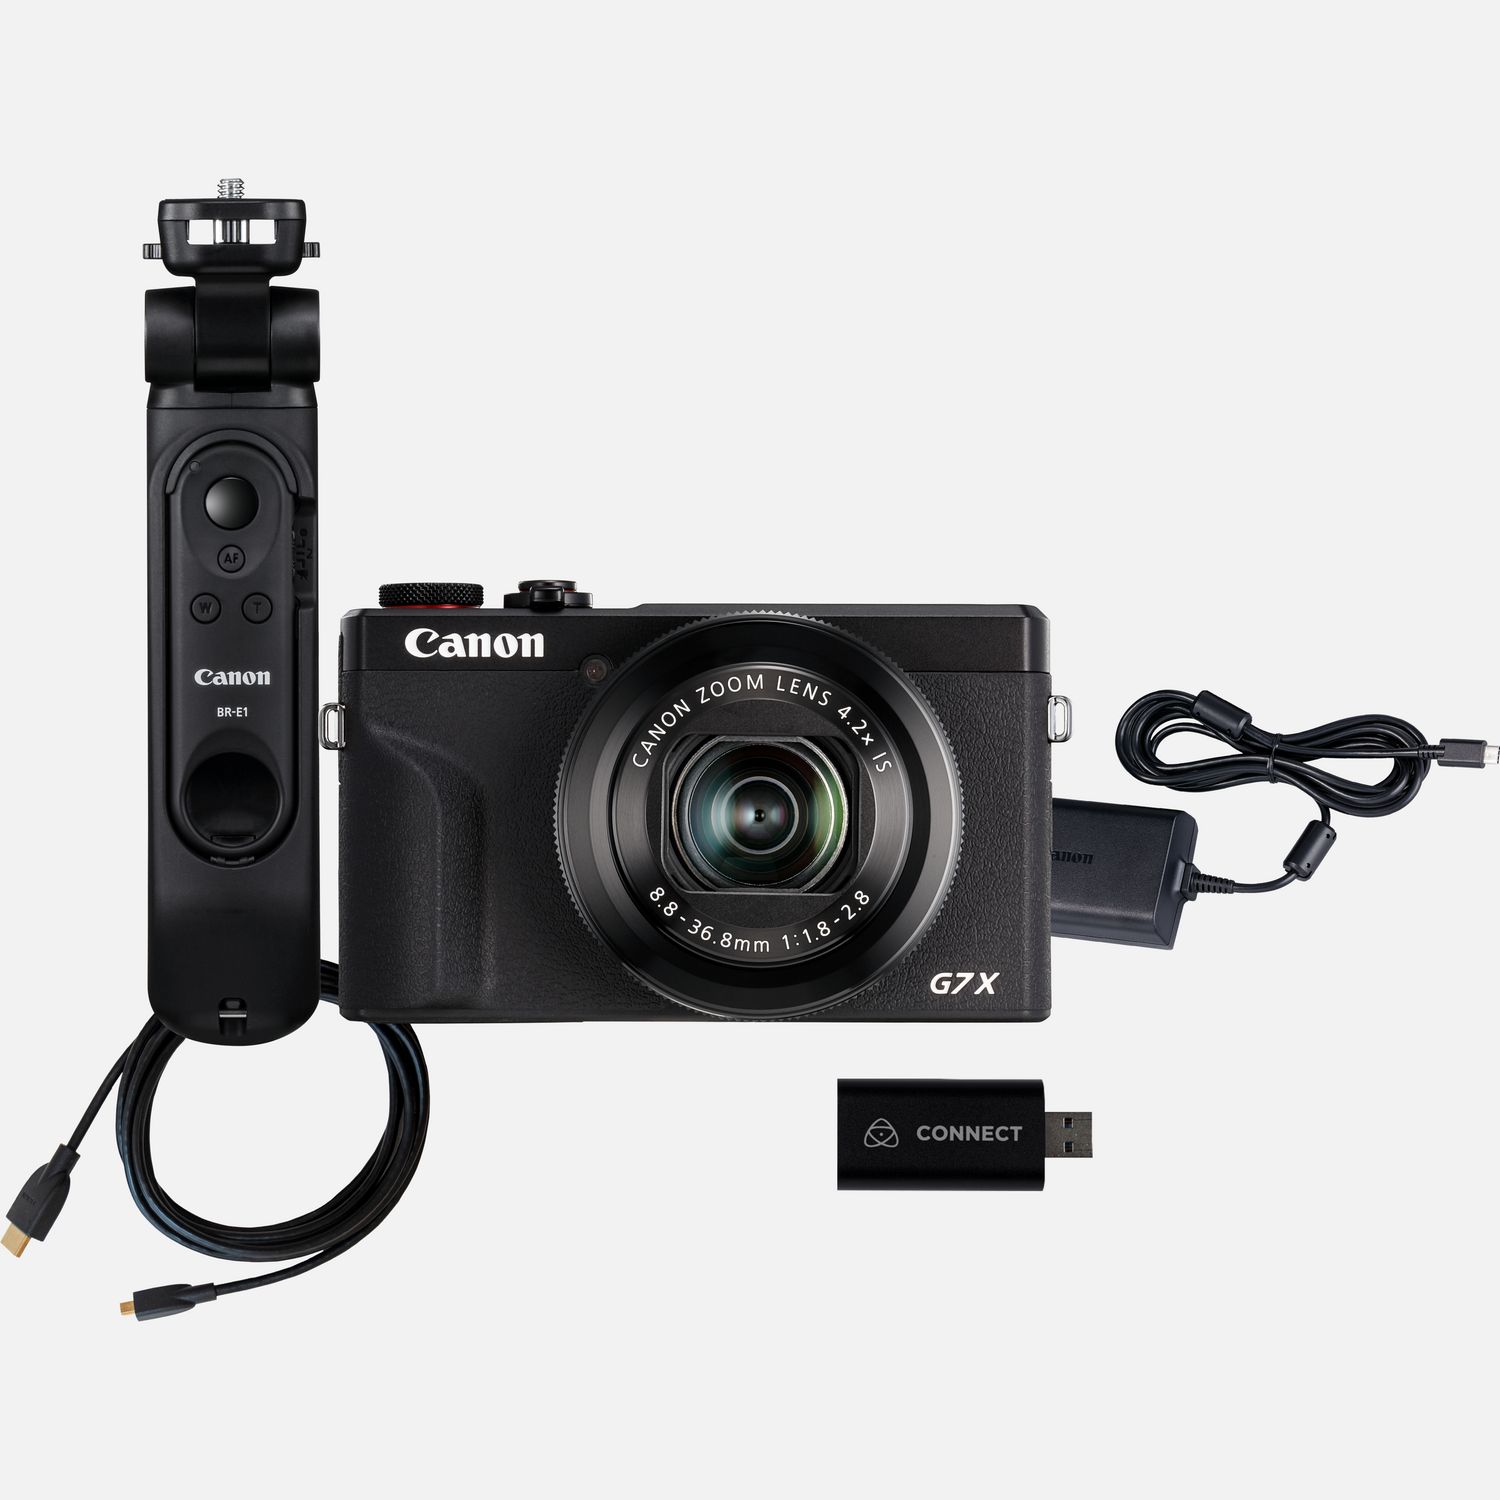 Buy Canon PowerShot G7 X Mark III Compact Live Streaming Kit in Wi-Fi